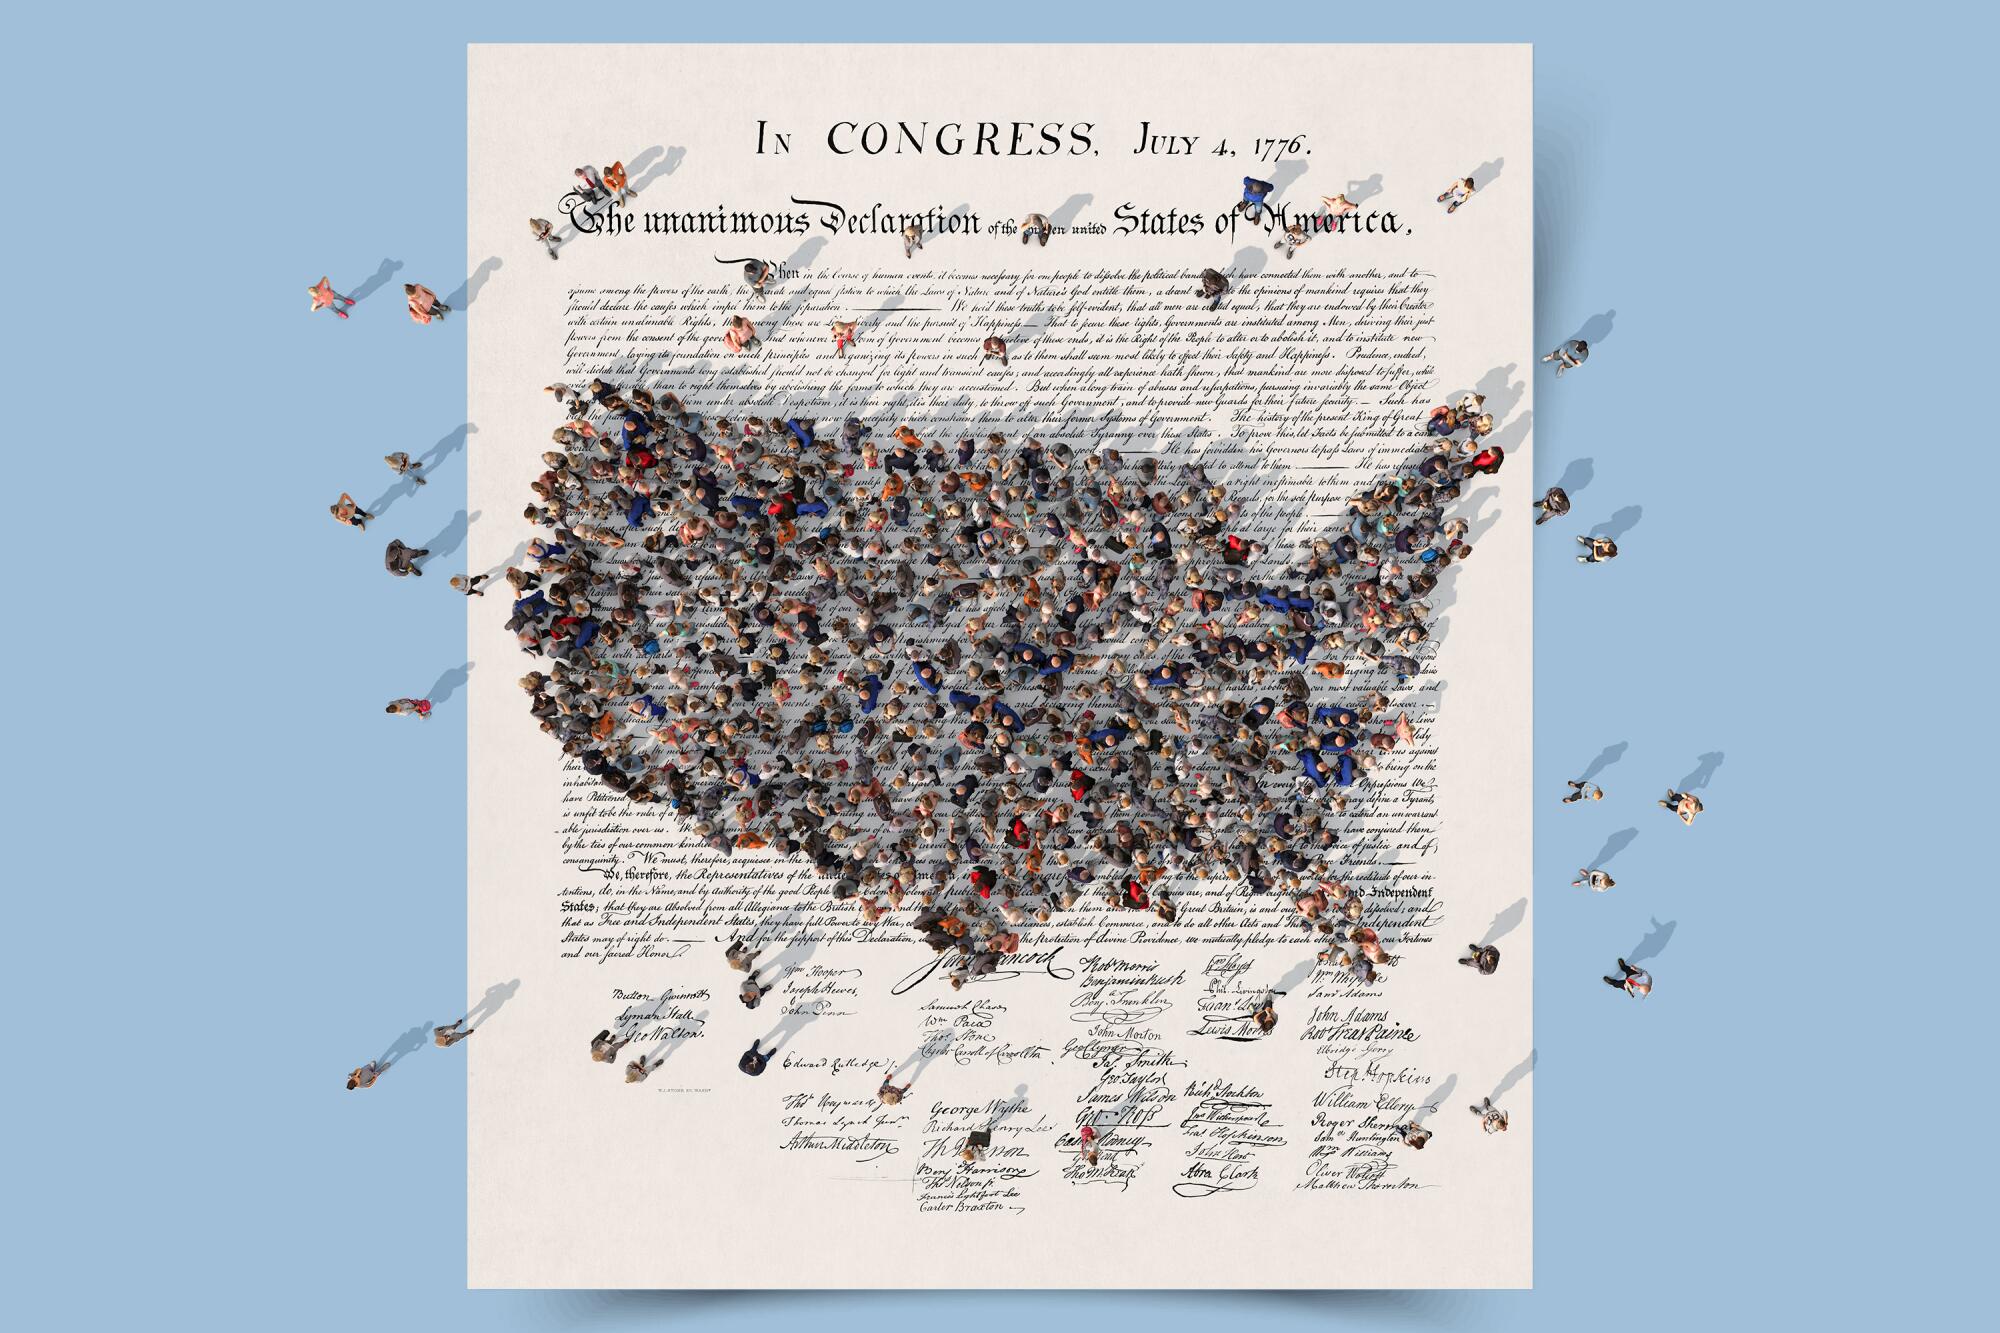 photo illustration of the U.S. Declaration of Independence with a crowd of people standing atop it in the shape of USA.